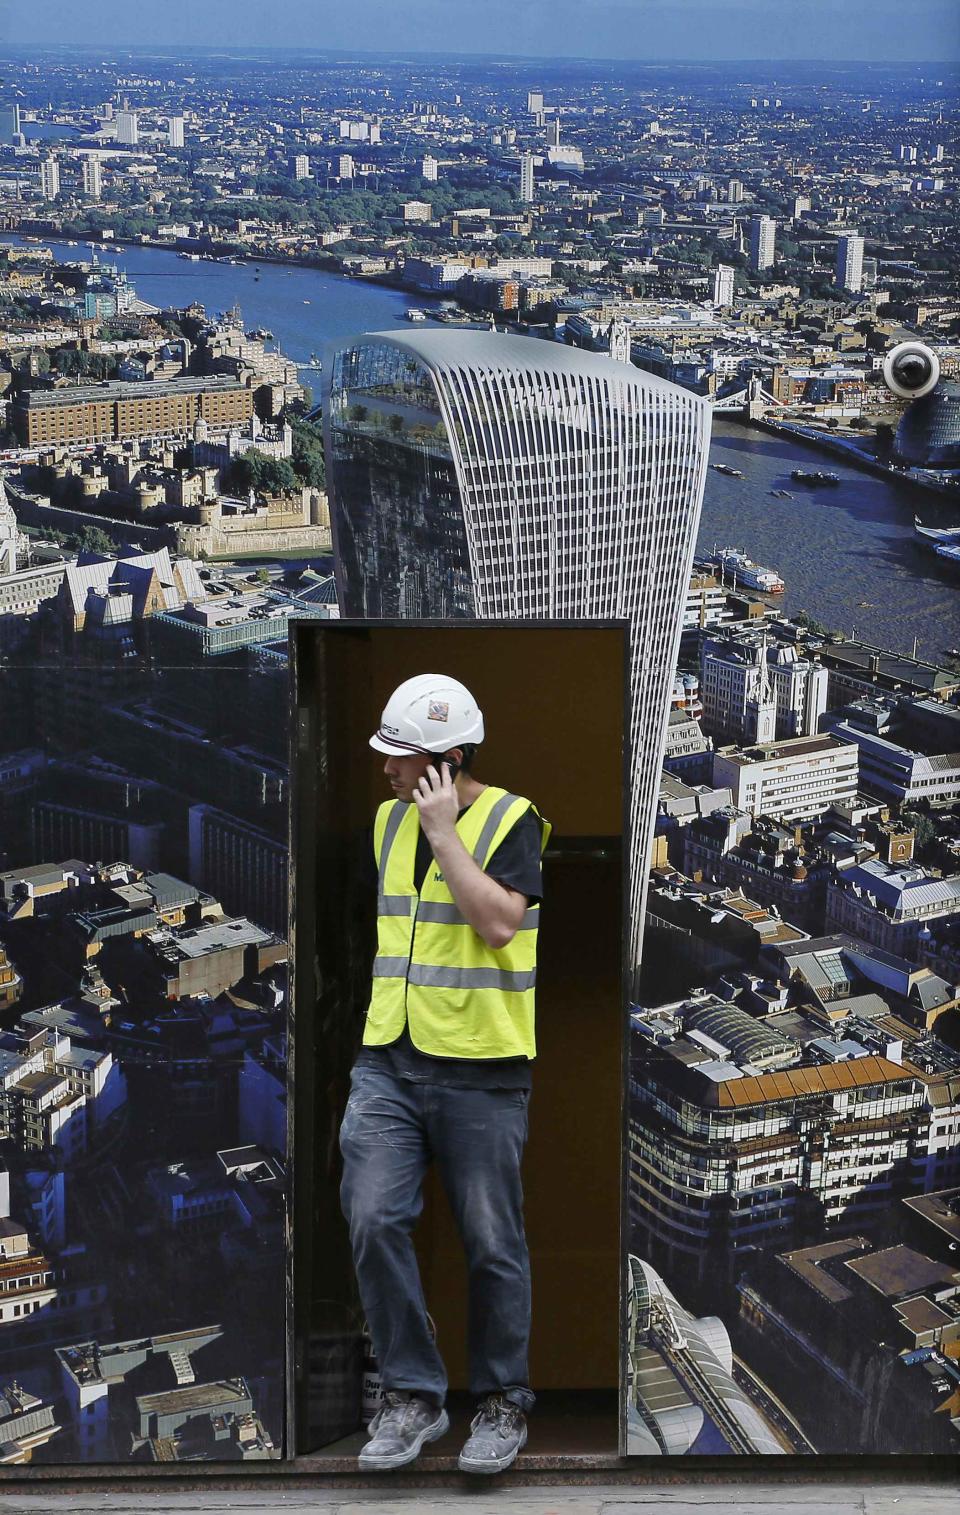 A worker walks out of a hoarding showing the Walkie Talkie tower in London